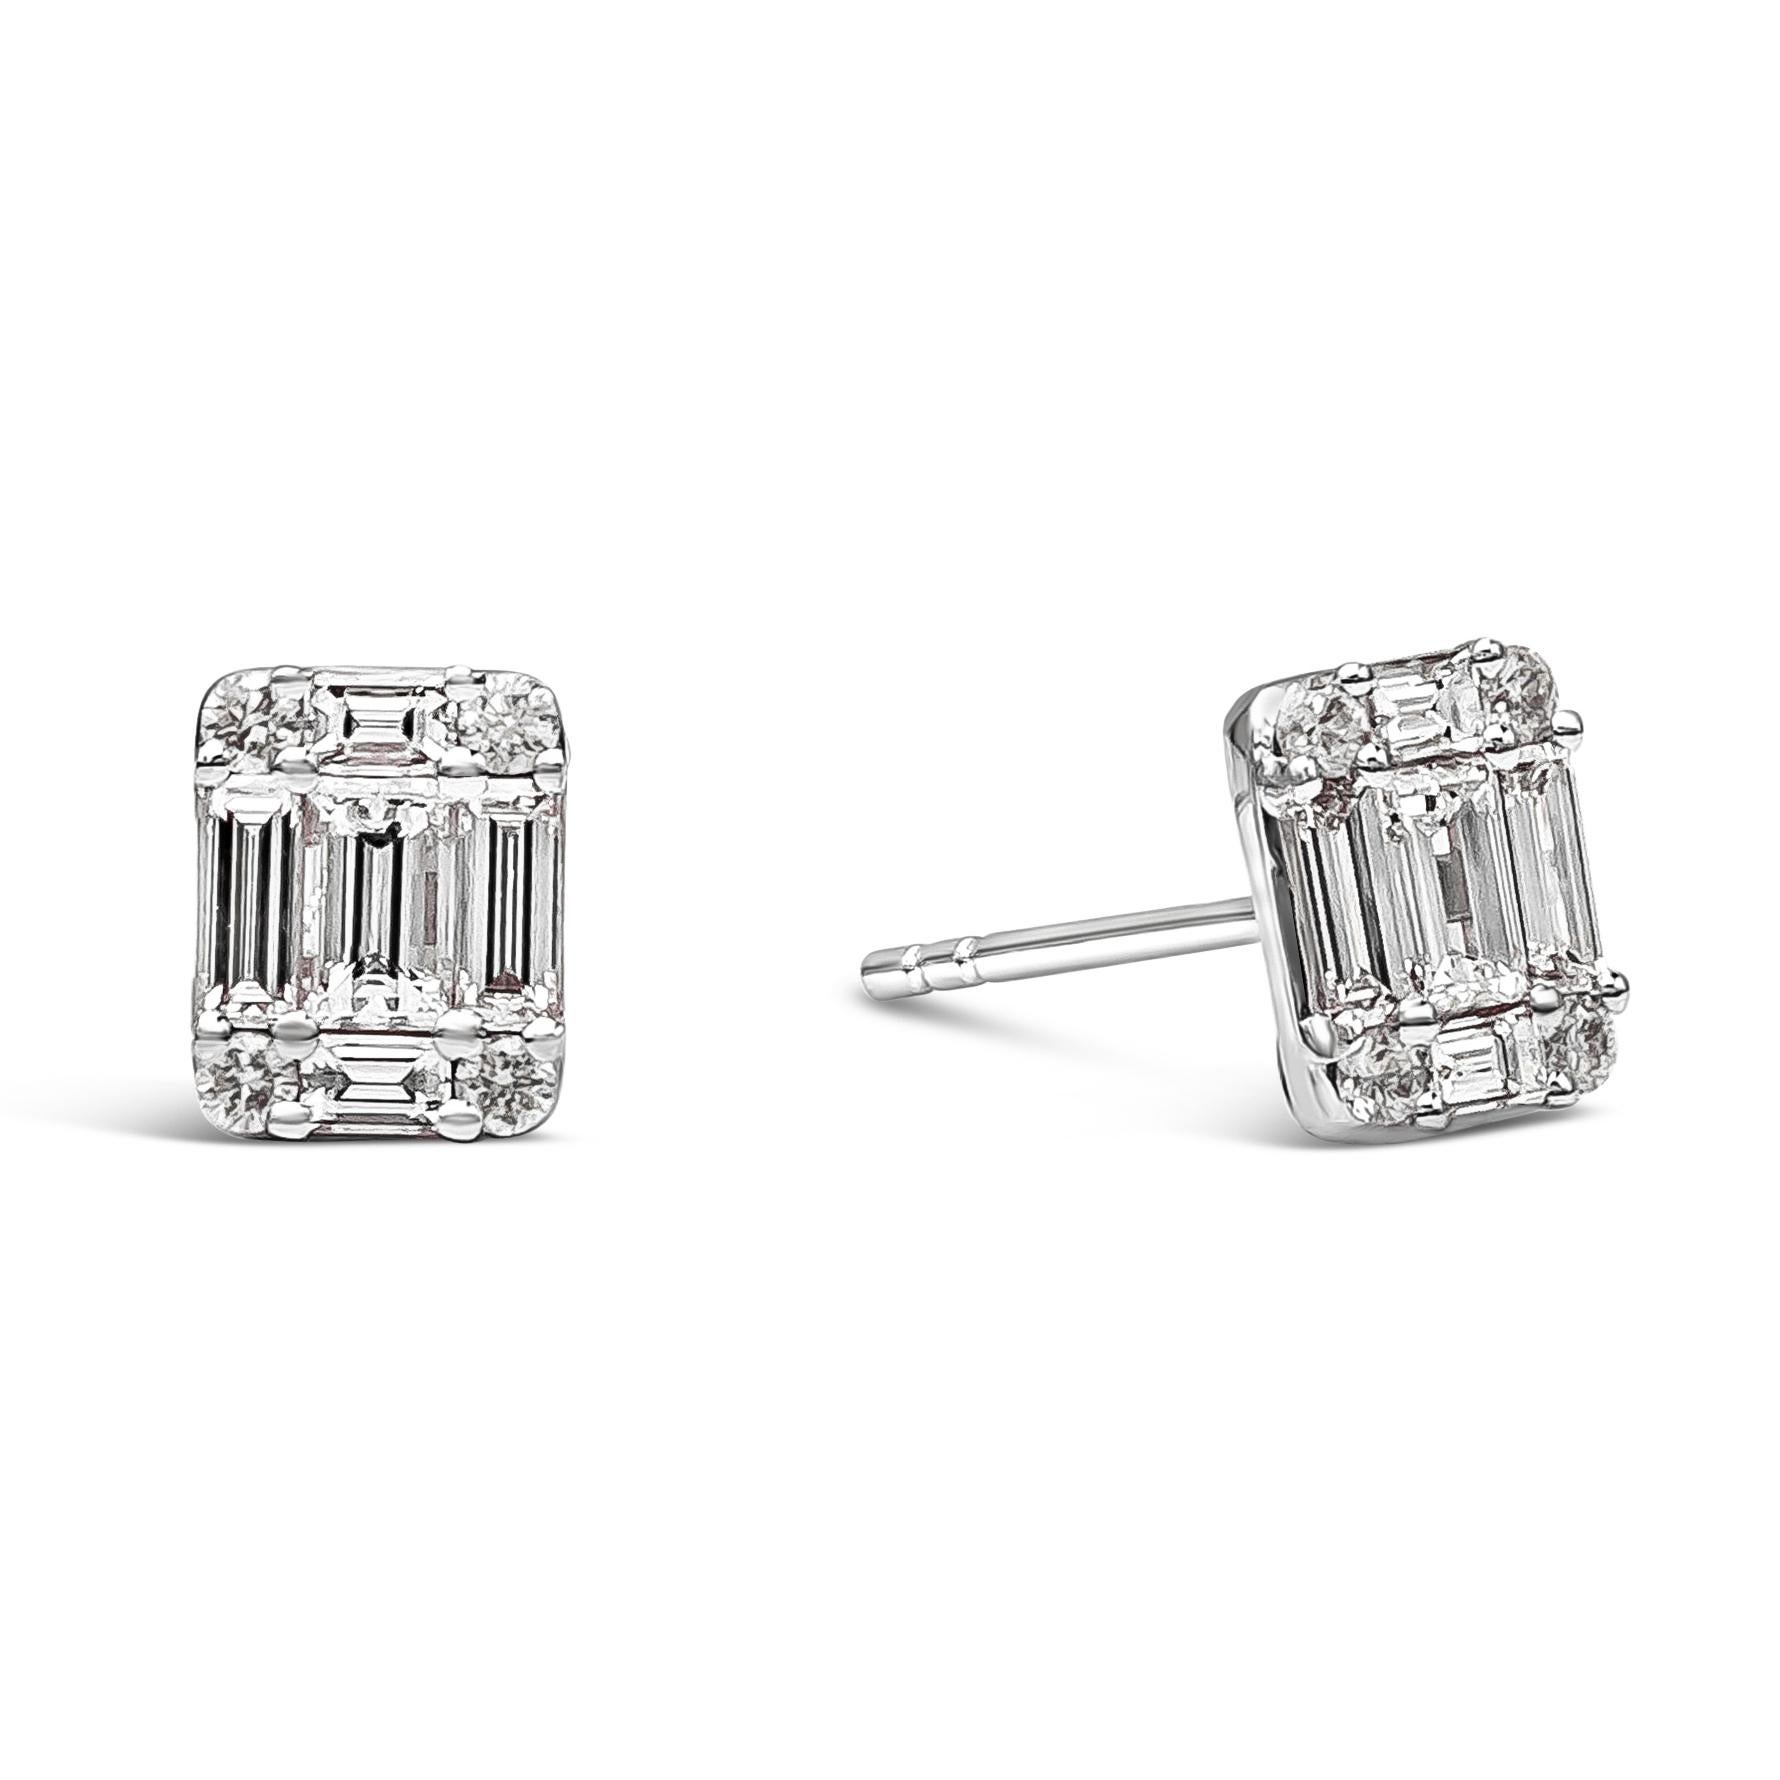 A beautiful illusion stud earrings showcasing a cluster of baguette and round diamonds, set in a emerald cut design. Diamonds weigh 0.94 carats total, F Color and VS in Clarity. Made with 18K White Gold

Style available in different price ranges.